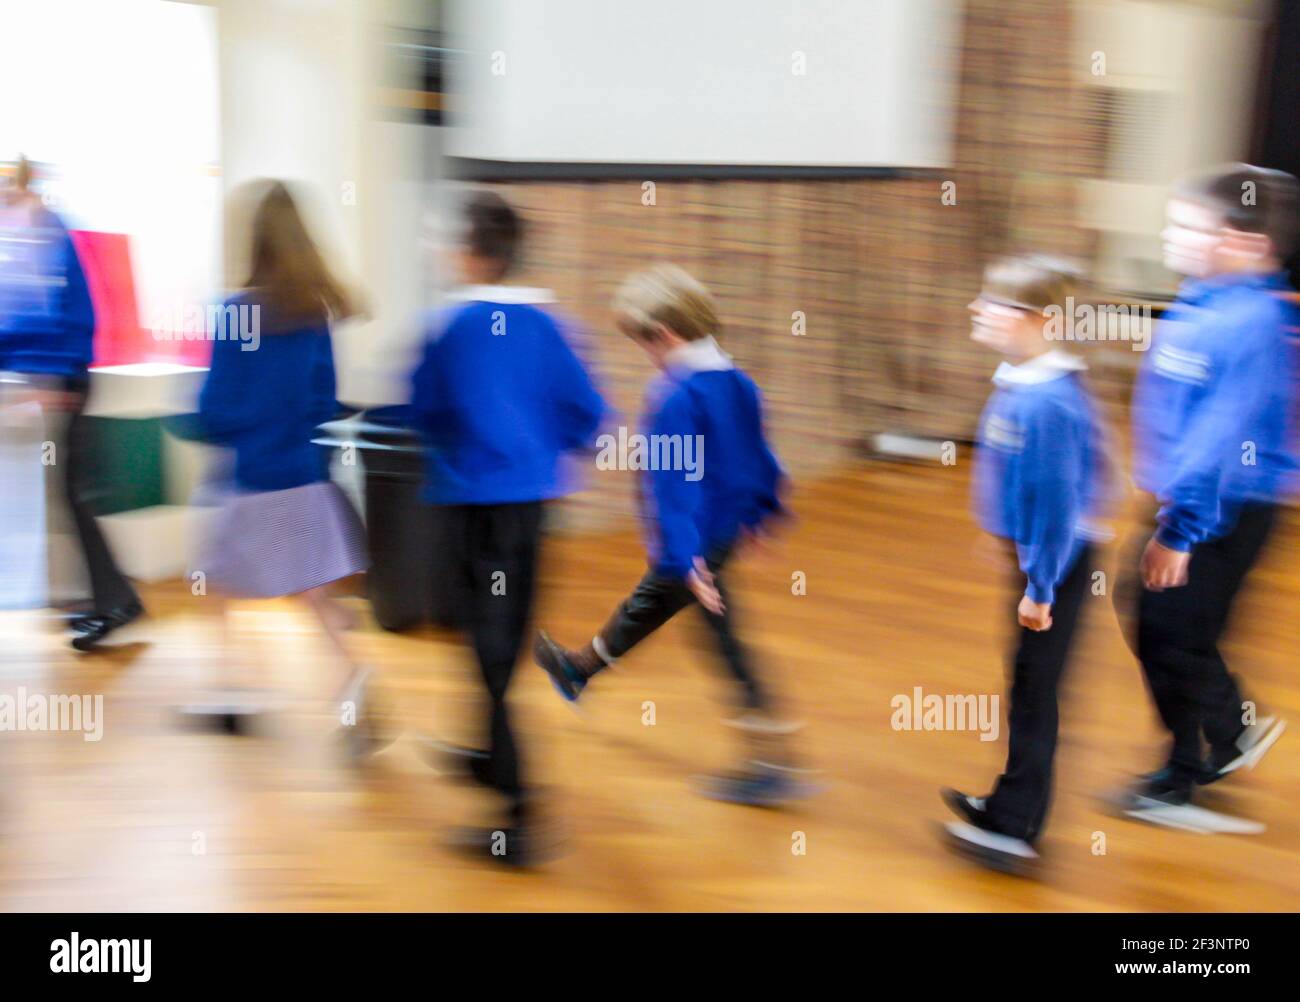 Group of primary school children in school uniform making their way back to the classroom after a break in the lesson with motion blur effect. Stock Photo